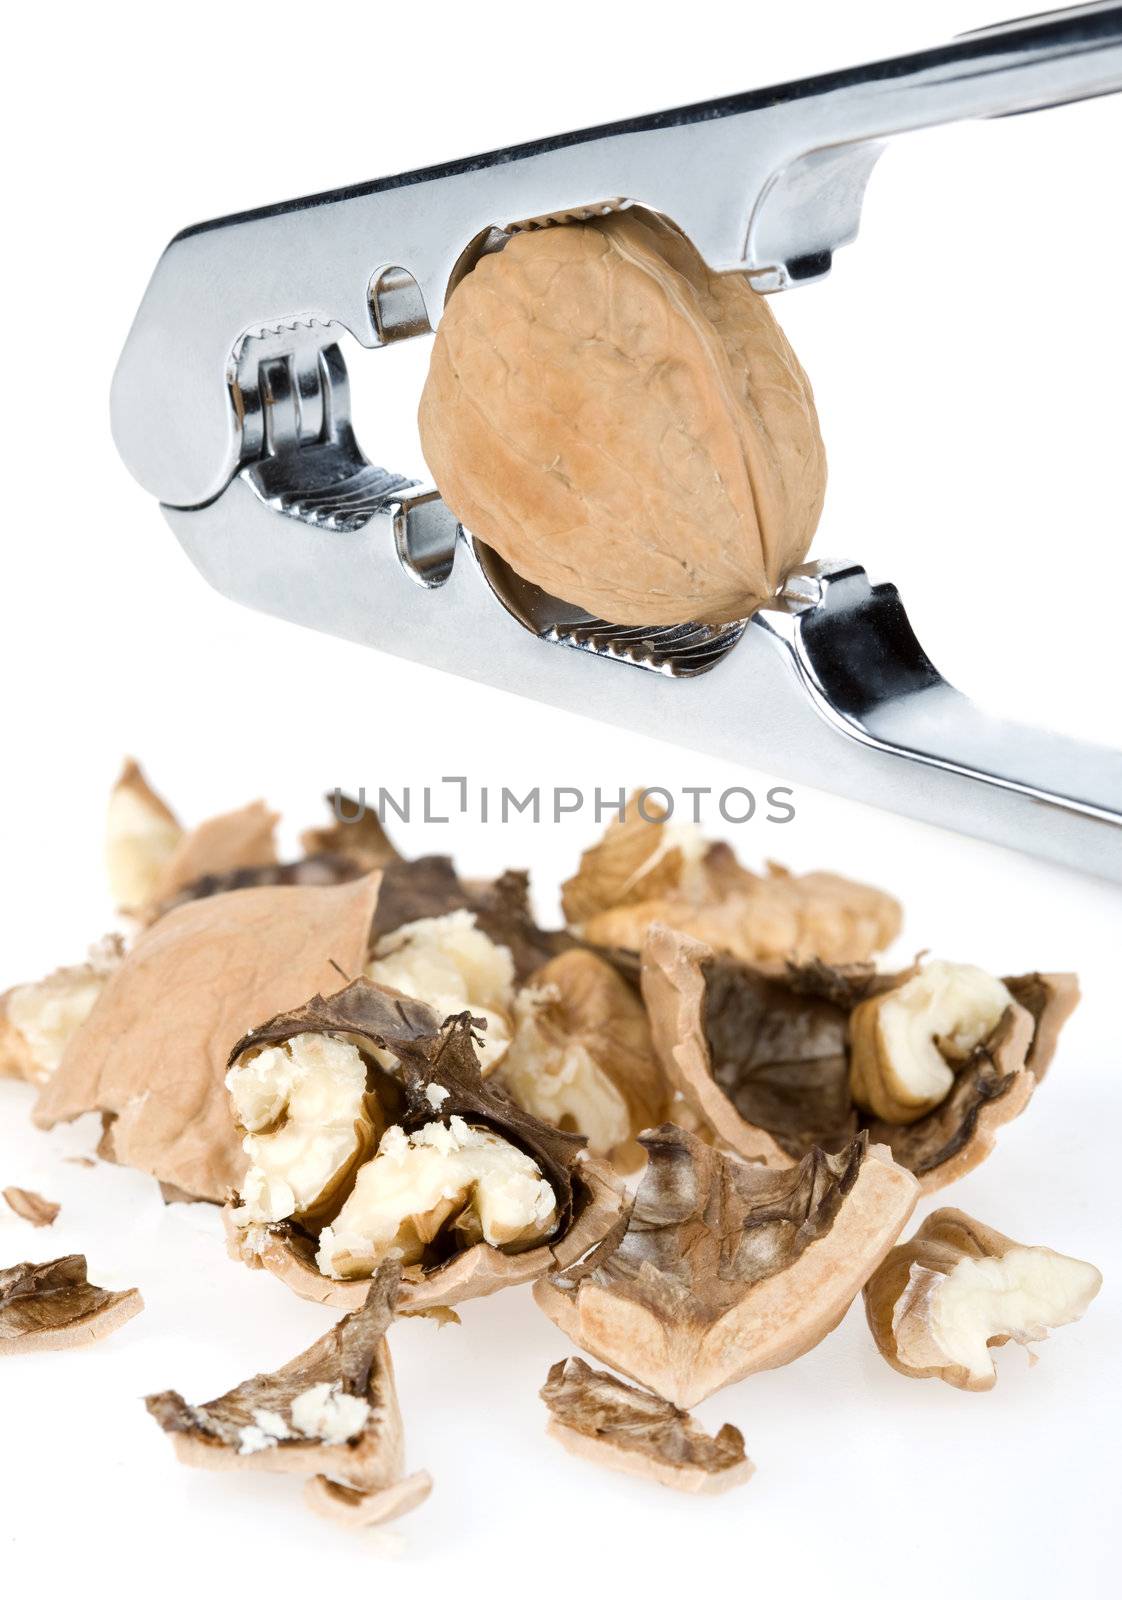 Metal nutcracker with crushed walnuts on white background